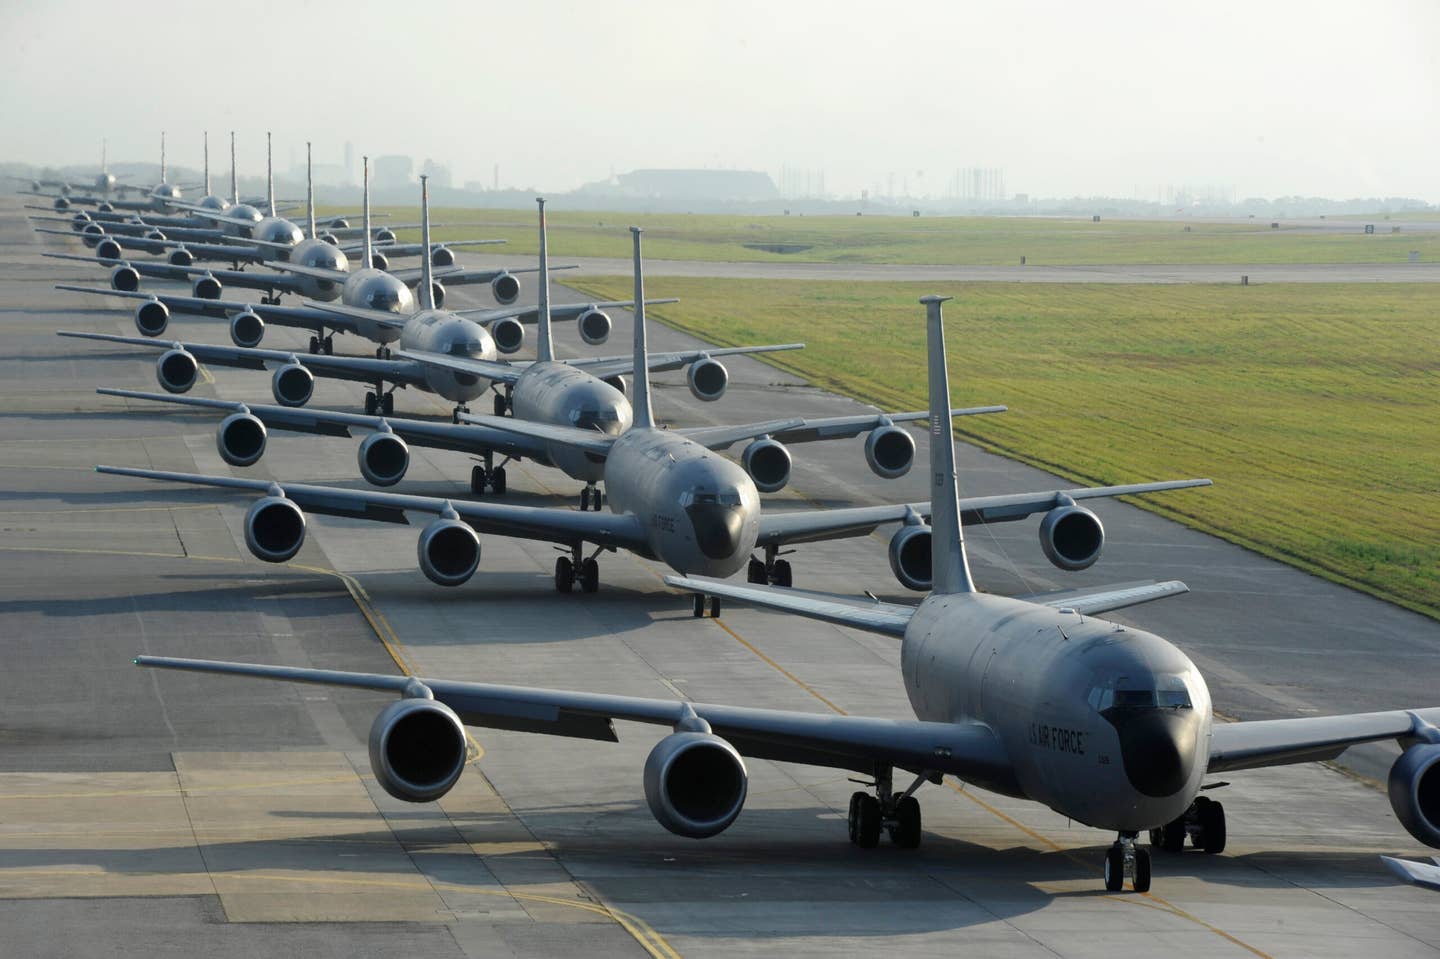 Twelve U.S. Air Force KC-135R Stratotankers from the 909th Air Refueling Squadron taxi onto the runway during an exercise at Kadena Air Base. <em>U.S. Air Force photo by Staff Sgt. Marcus Morris</em>